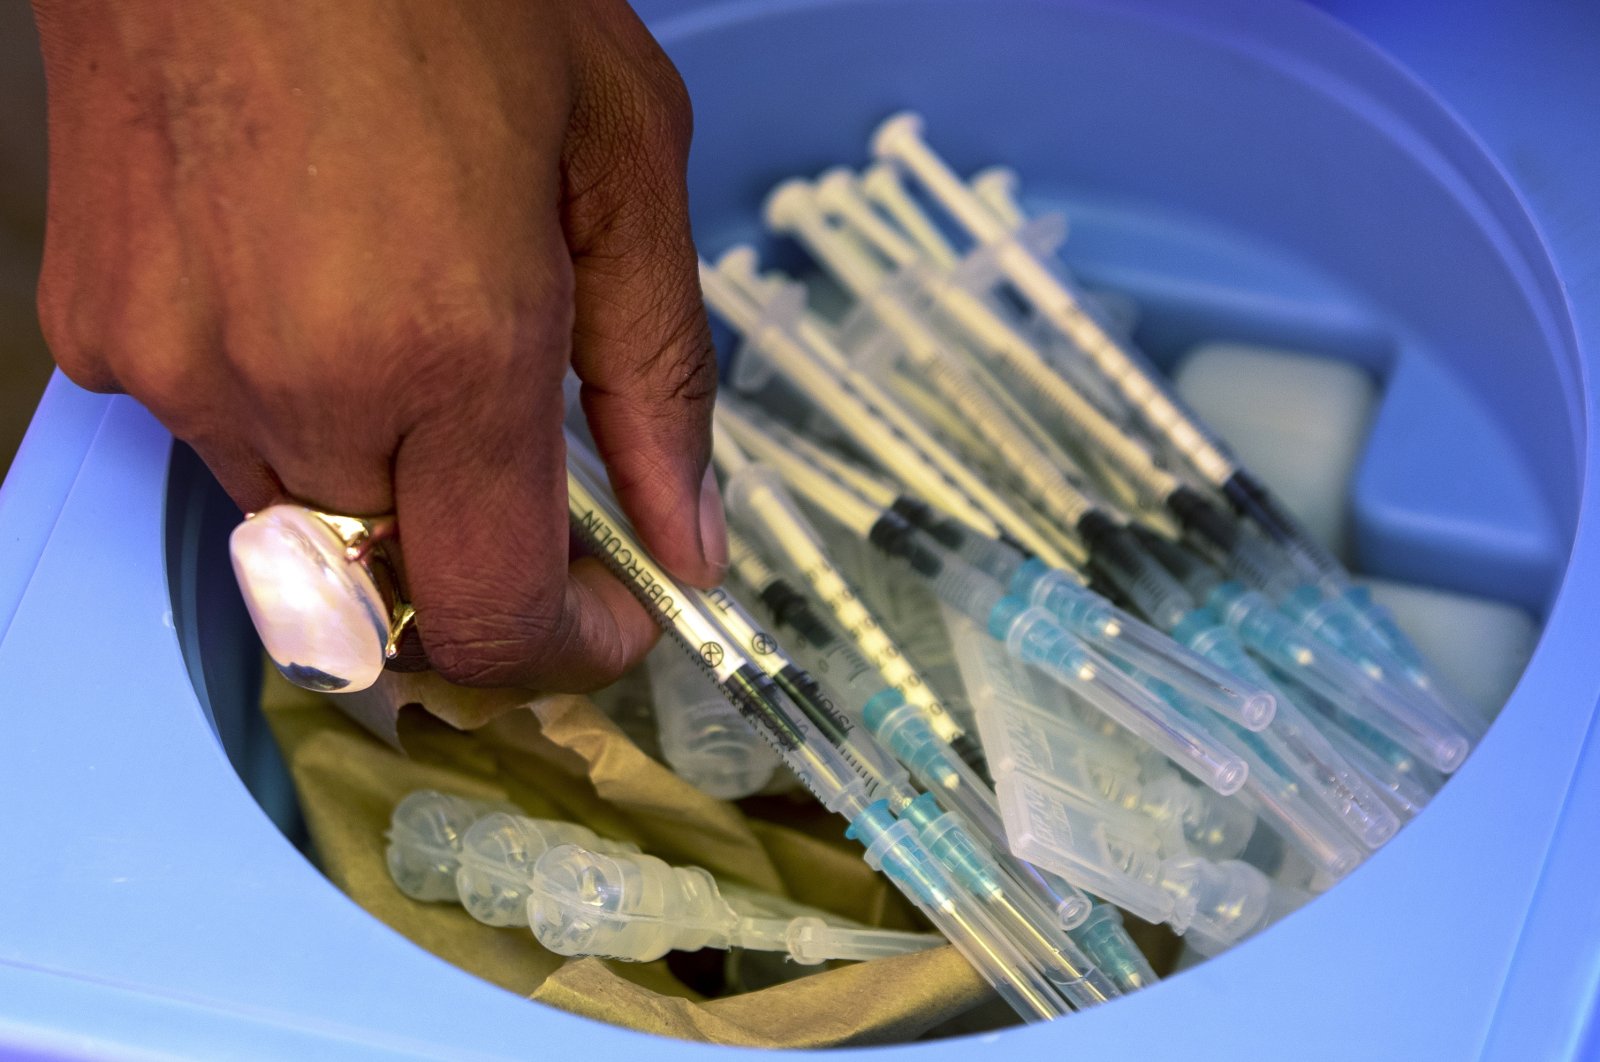 A health worker picks syringes as seniors get vaccinated with the first dose of the Pfizer coronavirus vaccine at the newly opened mass vaccination program for the elderly at a drive-through vaccination center in Johannesburg, South Africa, May 25, 2021. (AP Photo)